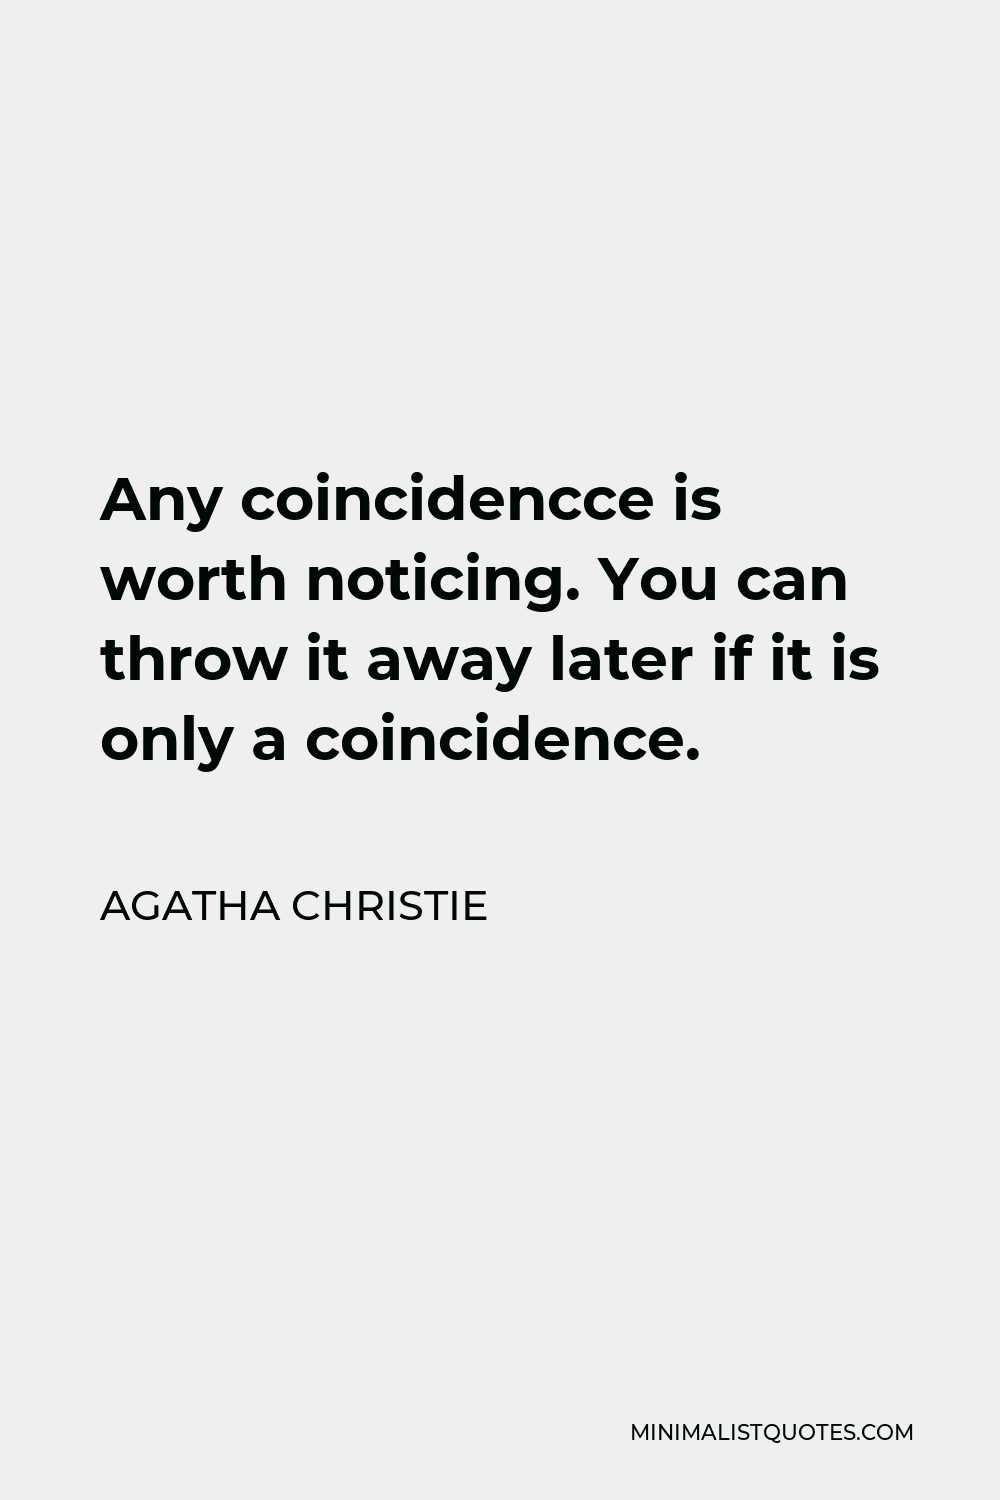 14+ Quotes For Coincidence